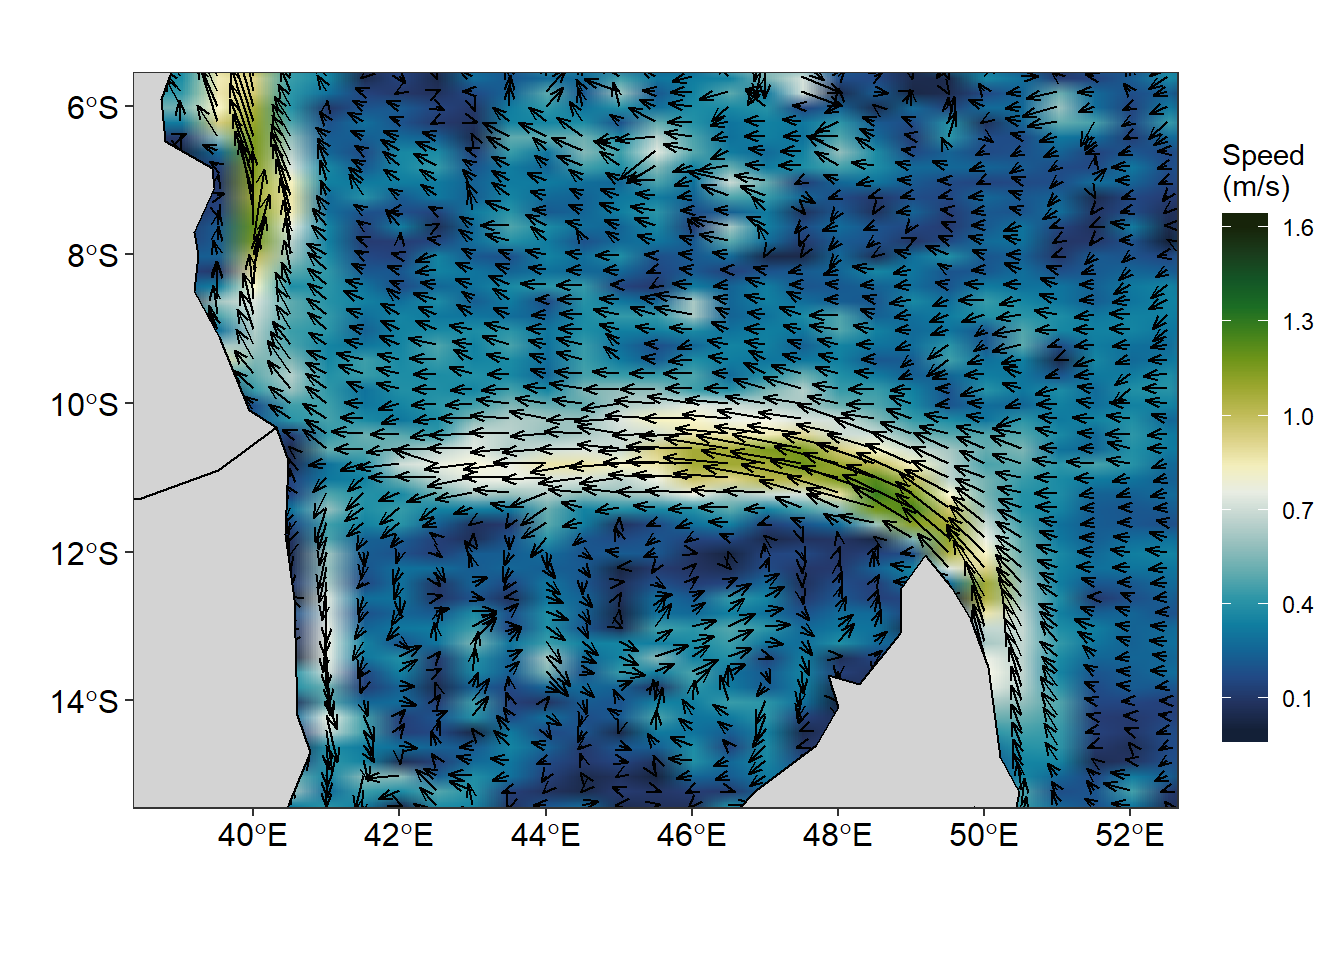 Vector field showing speed and direction of surface current created with **ggplot2** package